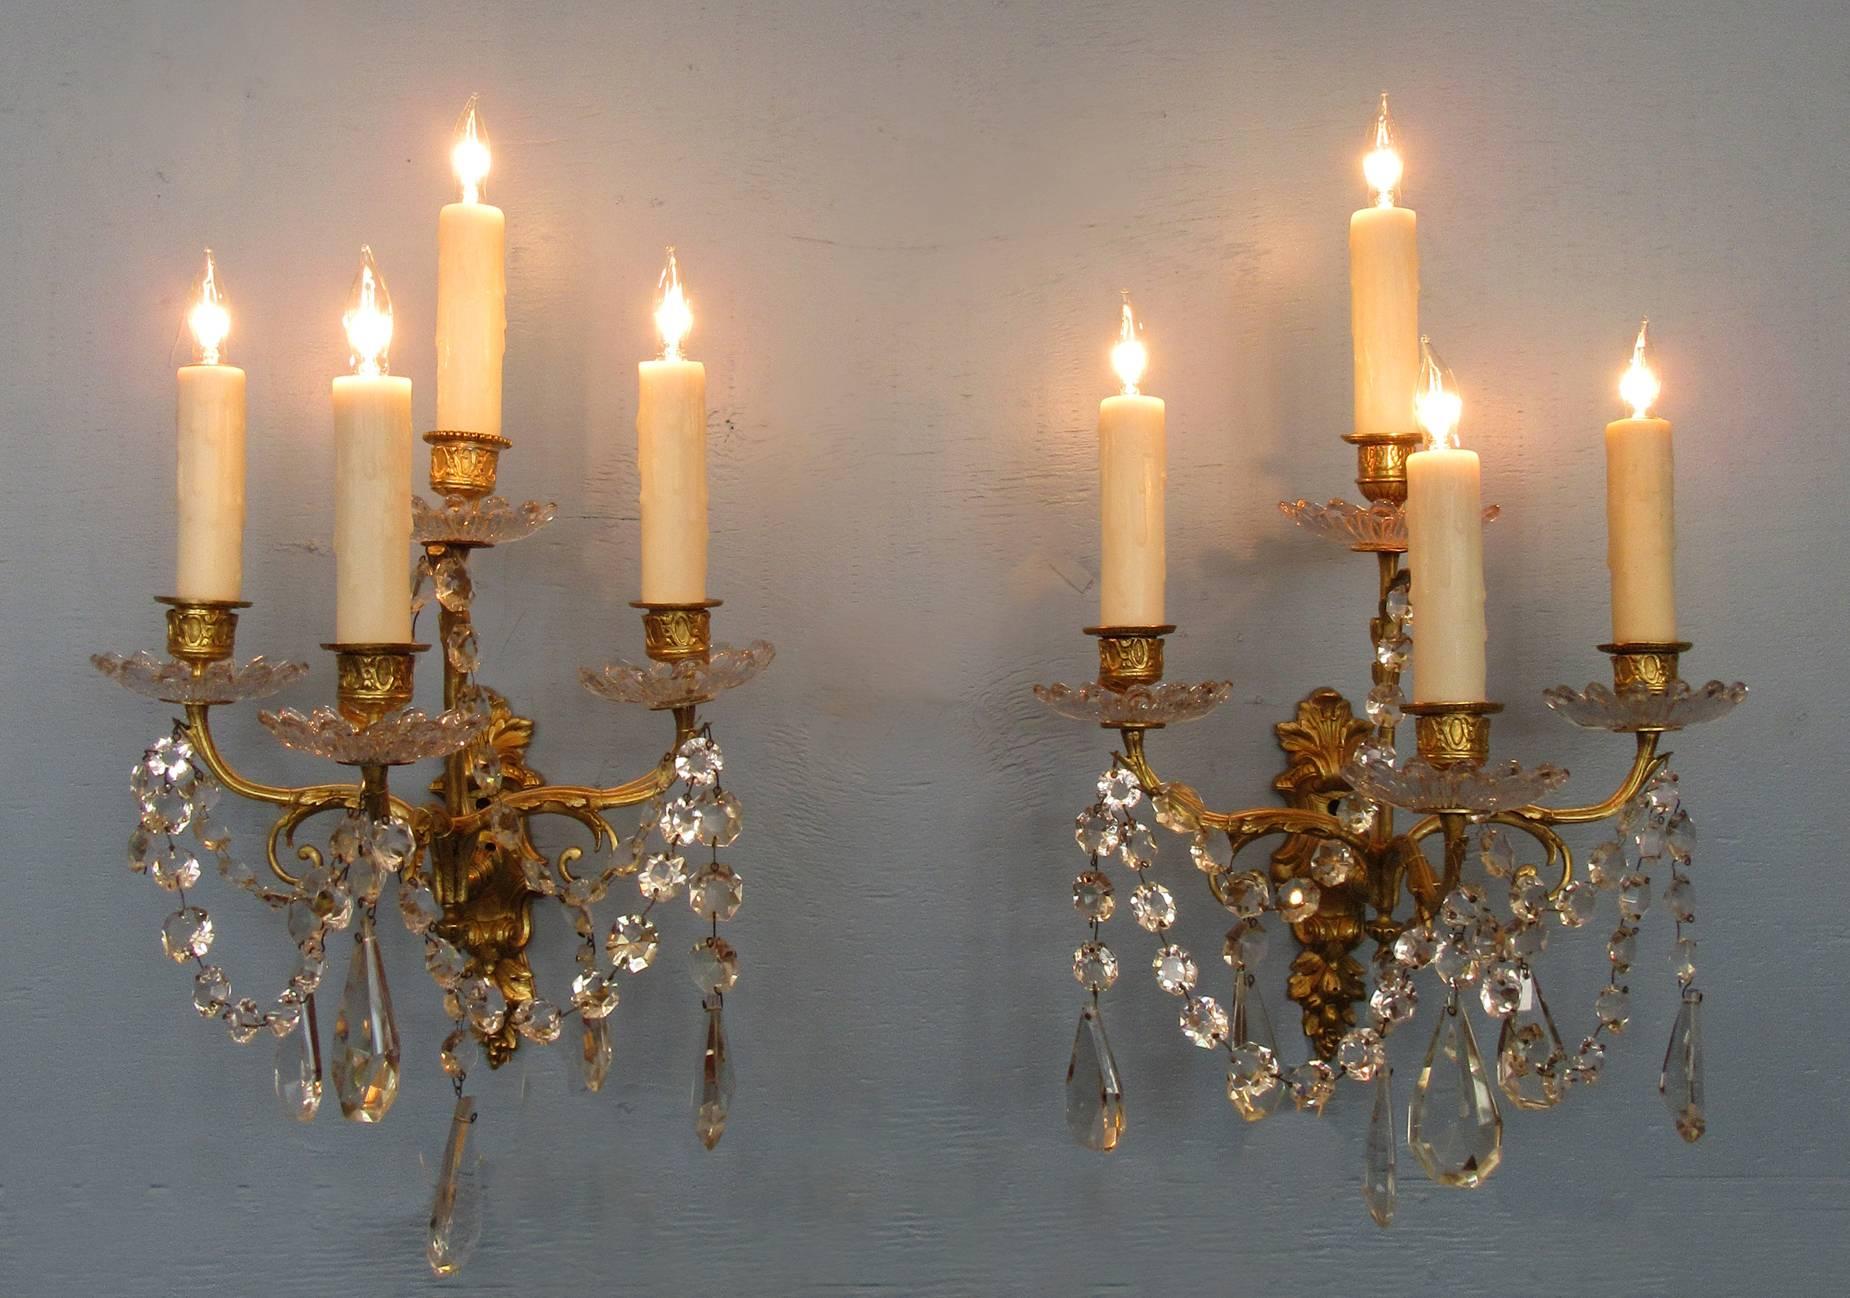 An elegant pair of 19th century French Regence sconces, circa 1820, each featuring four candle arms, Baccarat quality crystals and bobeche. The pair were originally candle but have been recently cleaned and rewired with new porcelain sockets.